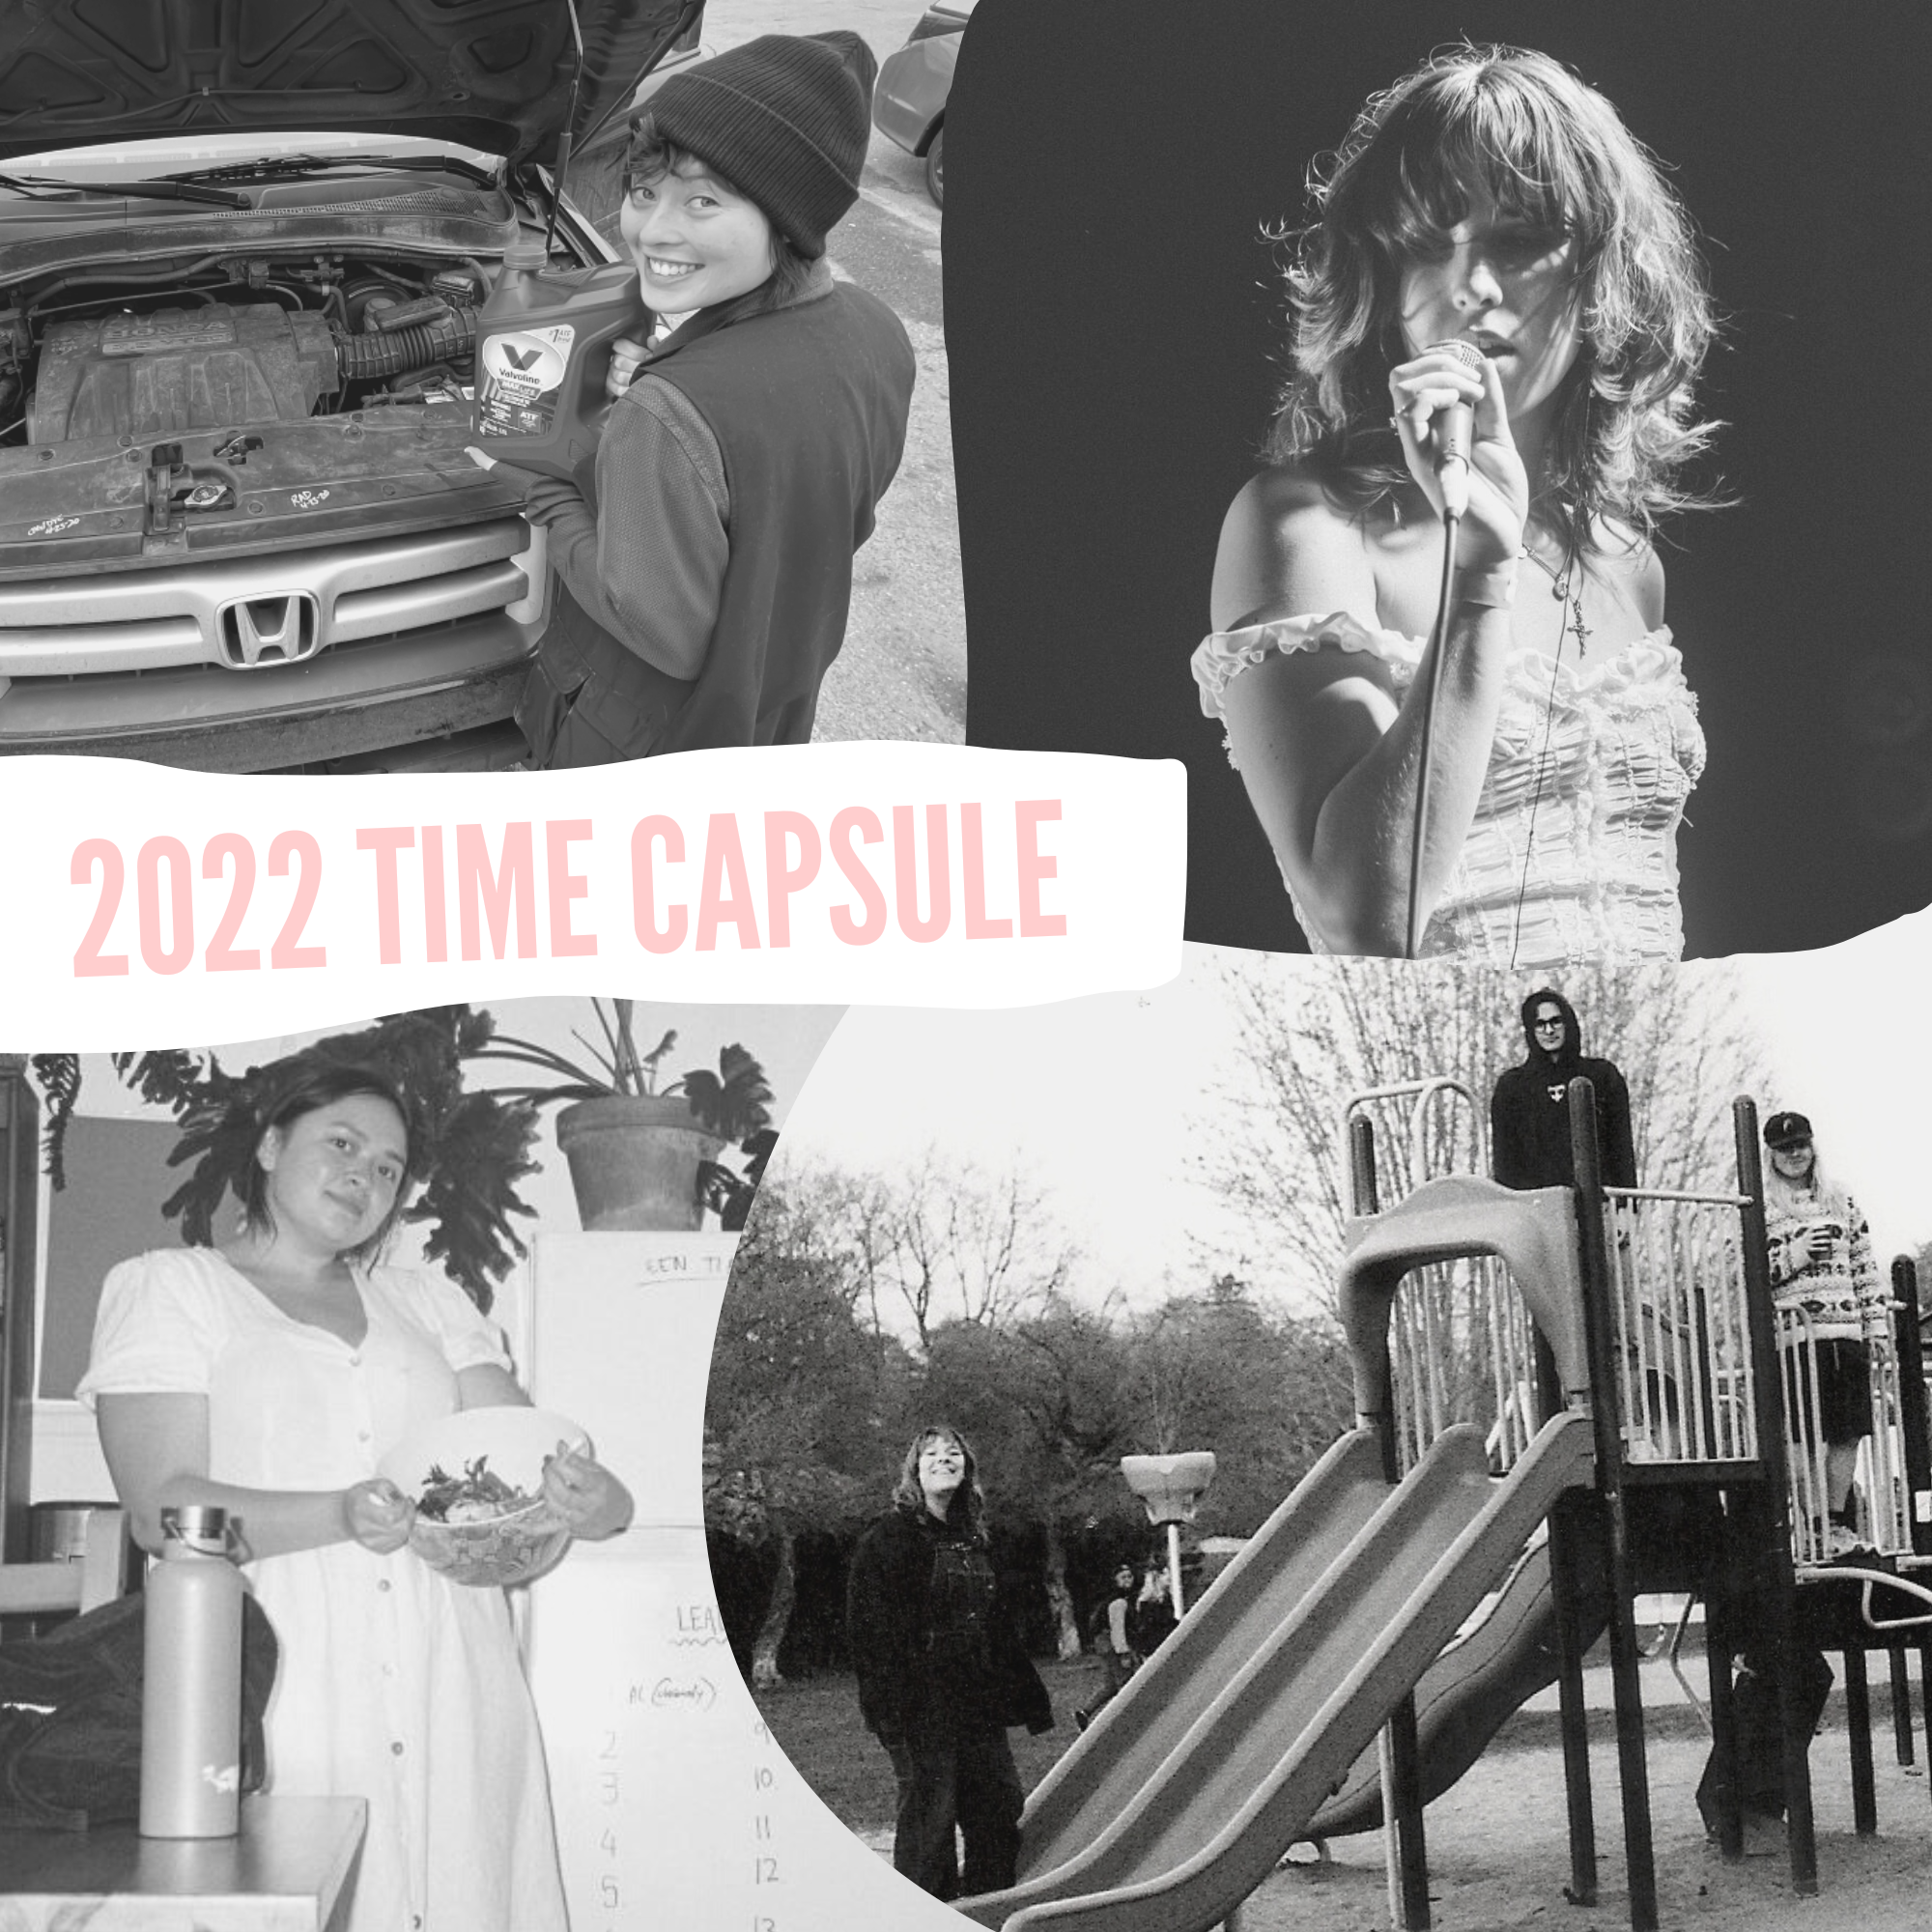 A Time Capsule for 2022